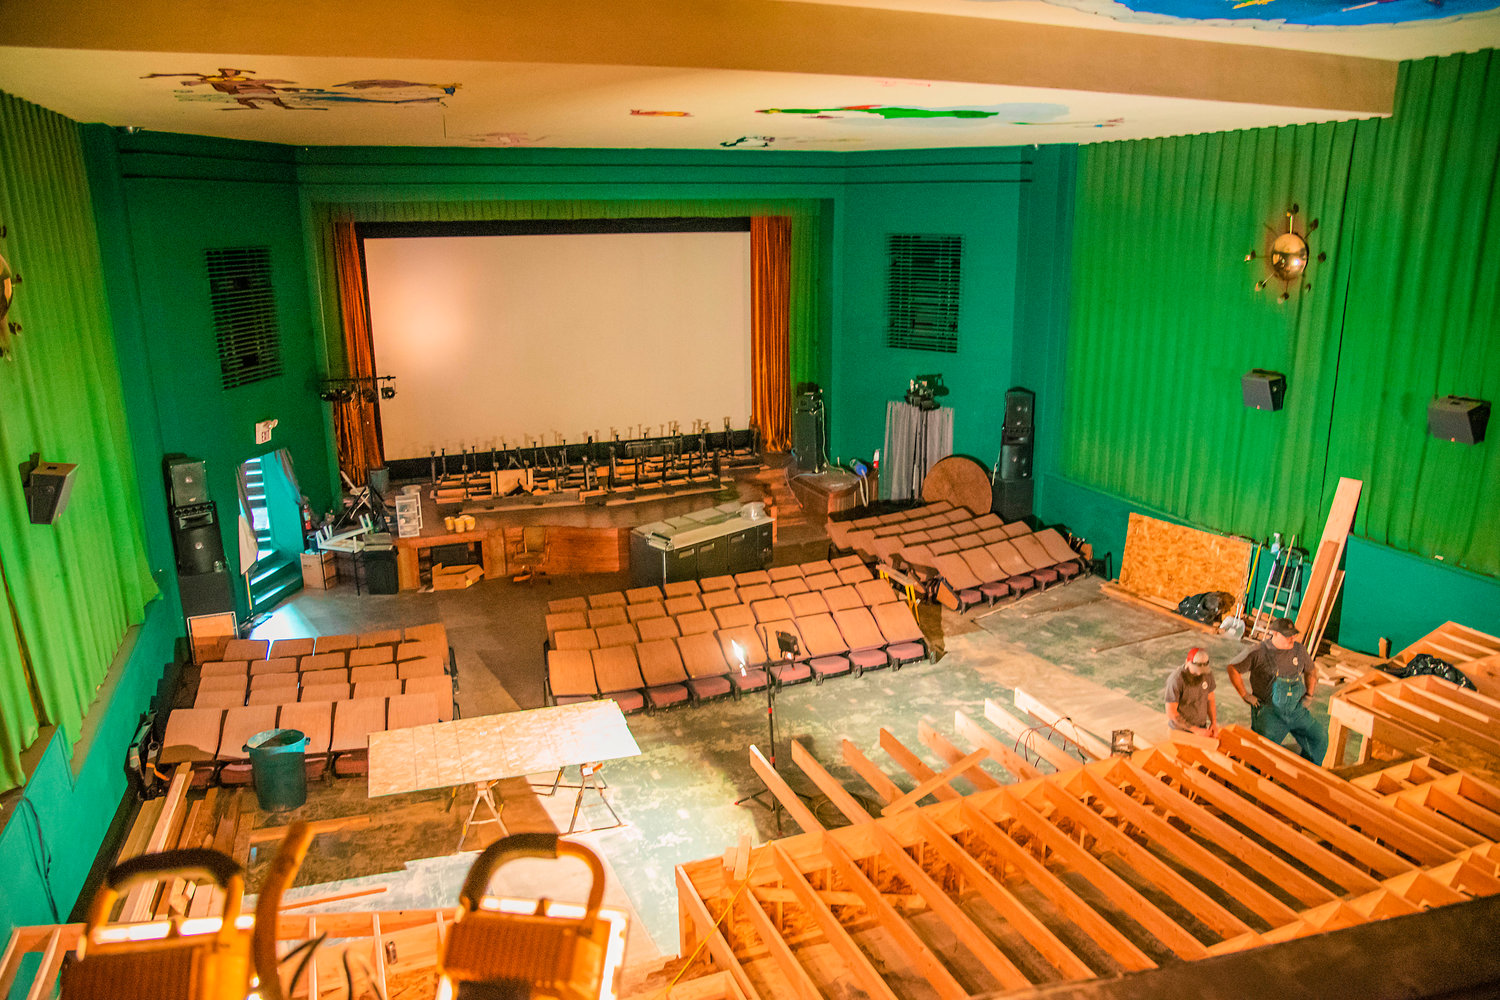 Flood lights illuminate the interior of the Chehalis Theater during renovatons on Tuesday.